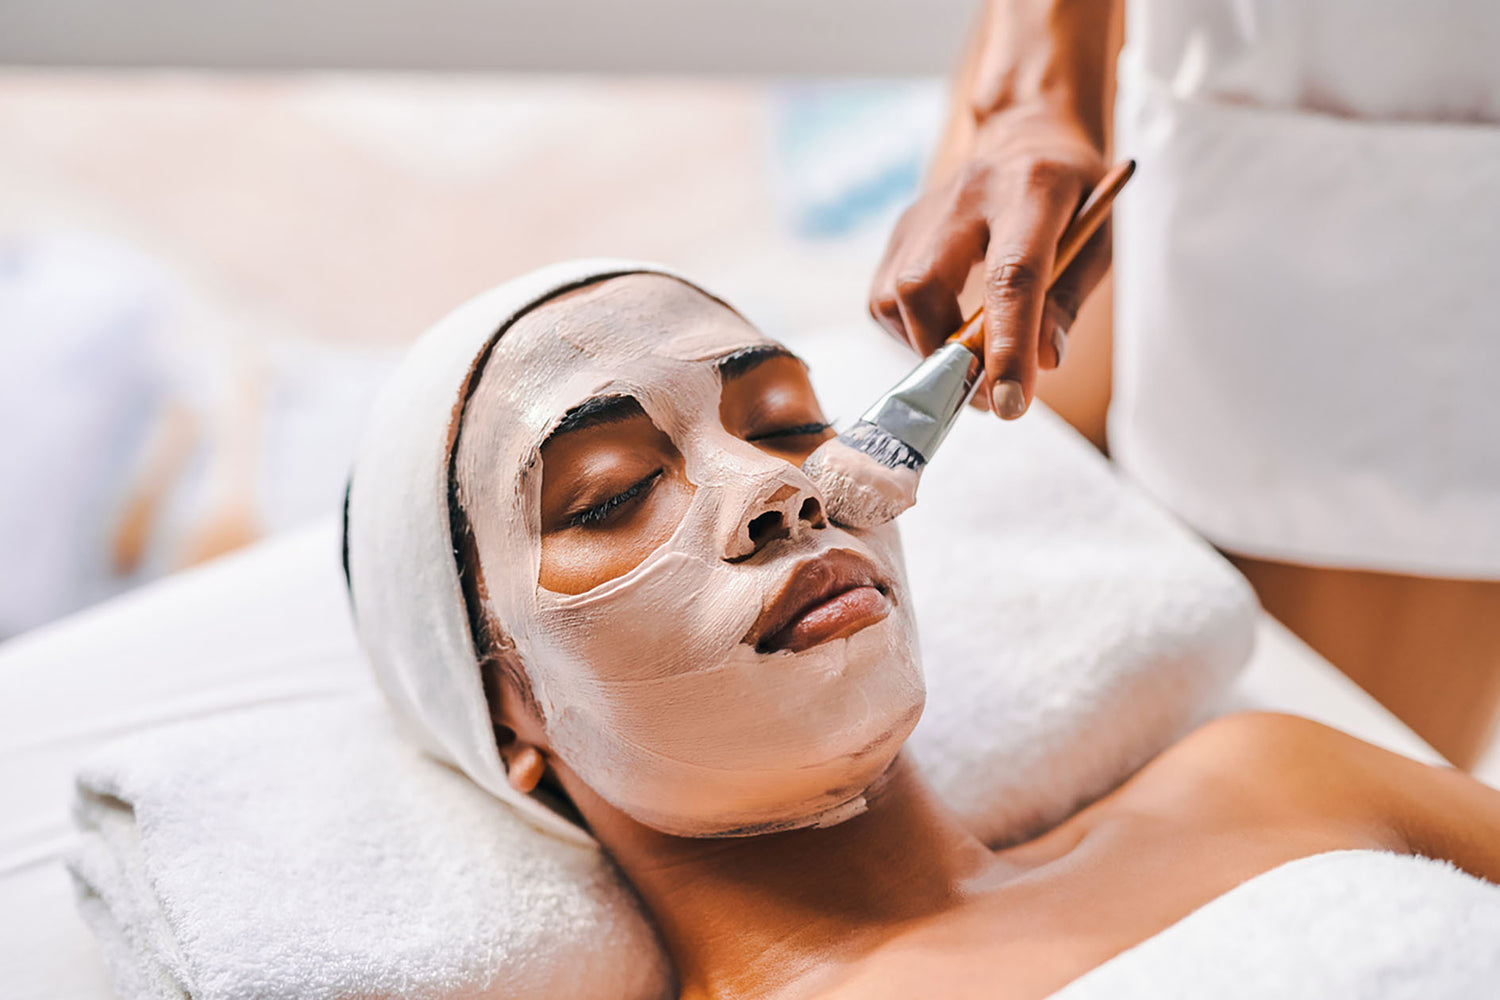 Professional facials are beneficial for healthy skin